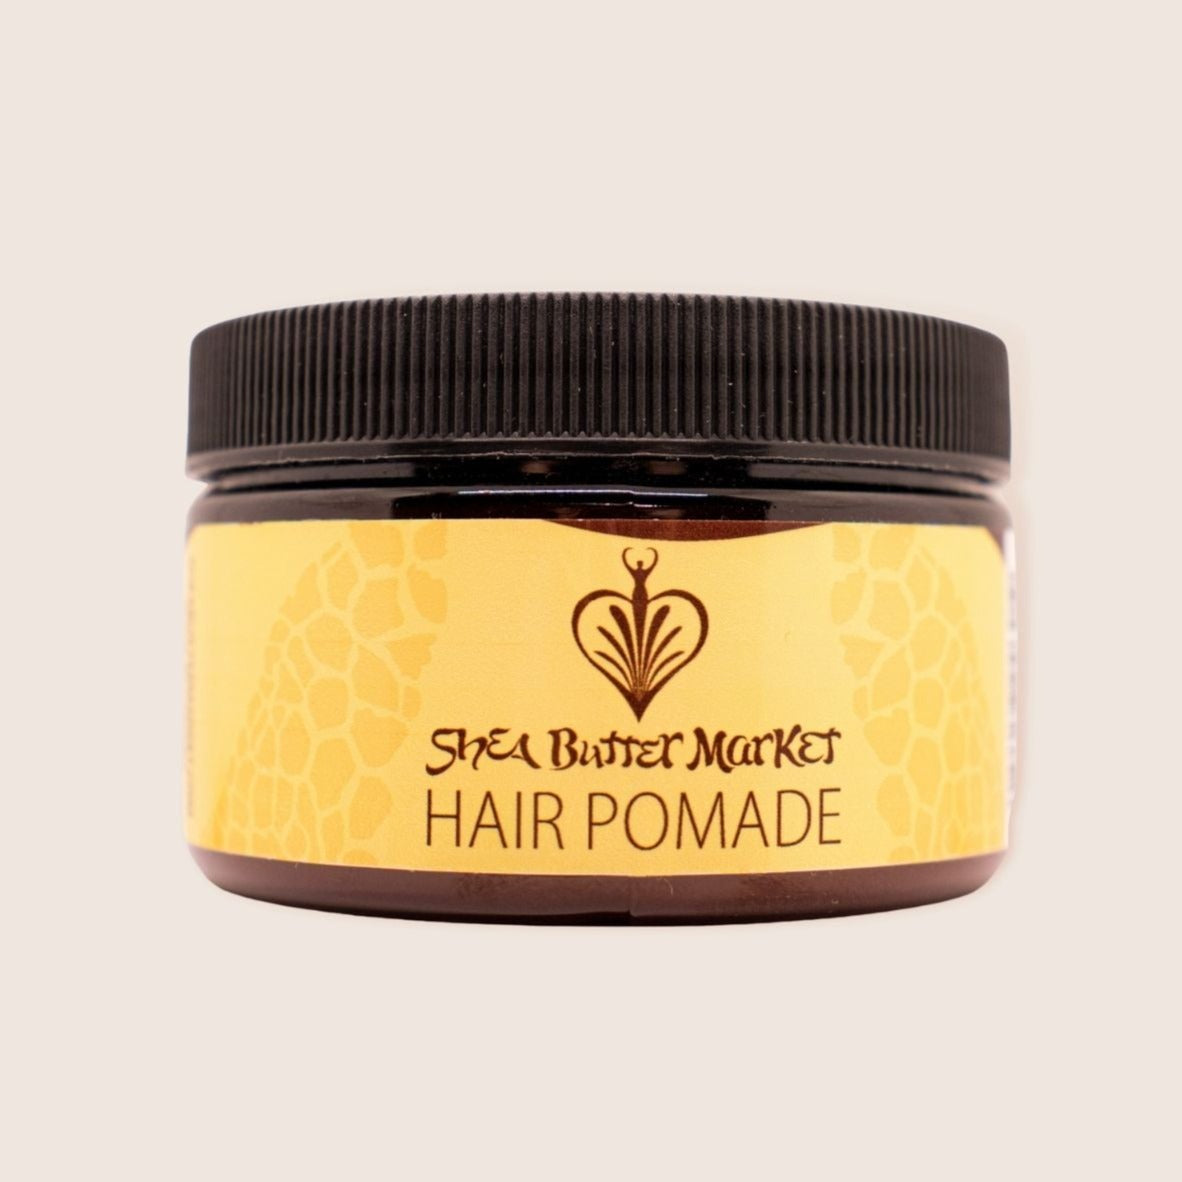 Hair Pomade by Shea Butter Market